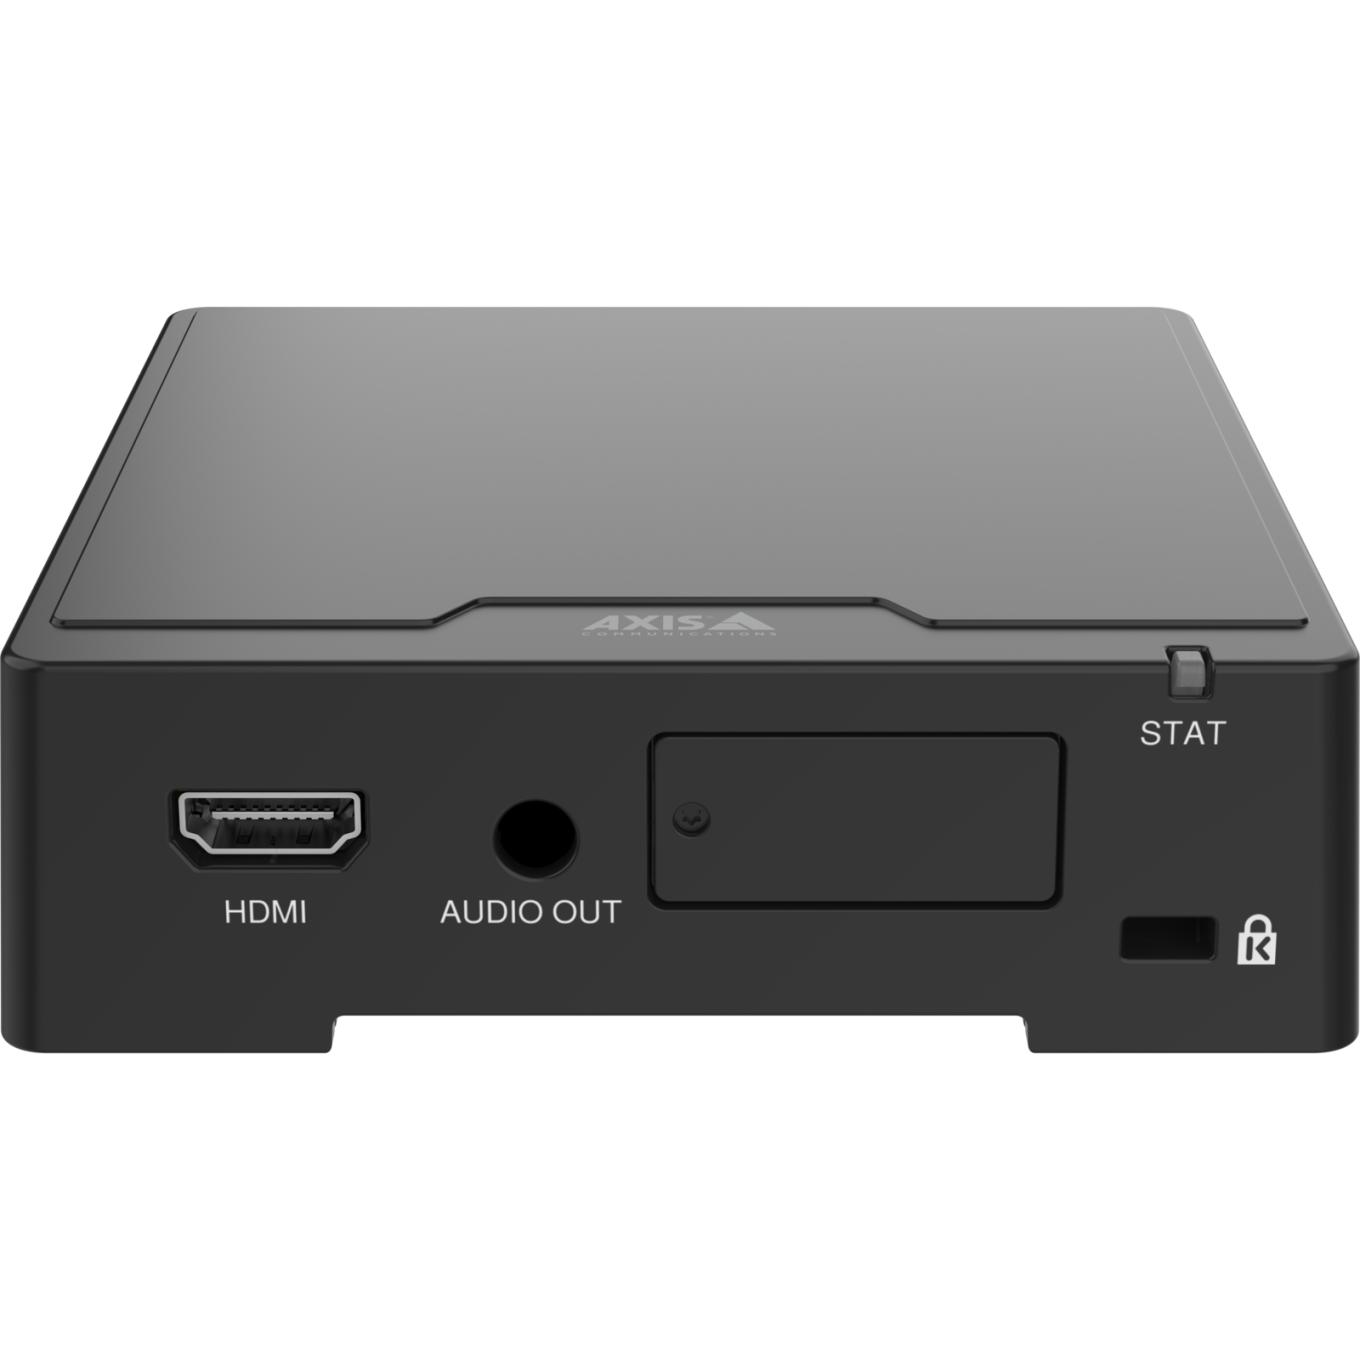 AXIS D1110 Video Decoder 4K | Axis Communications